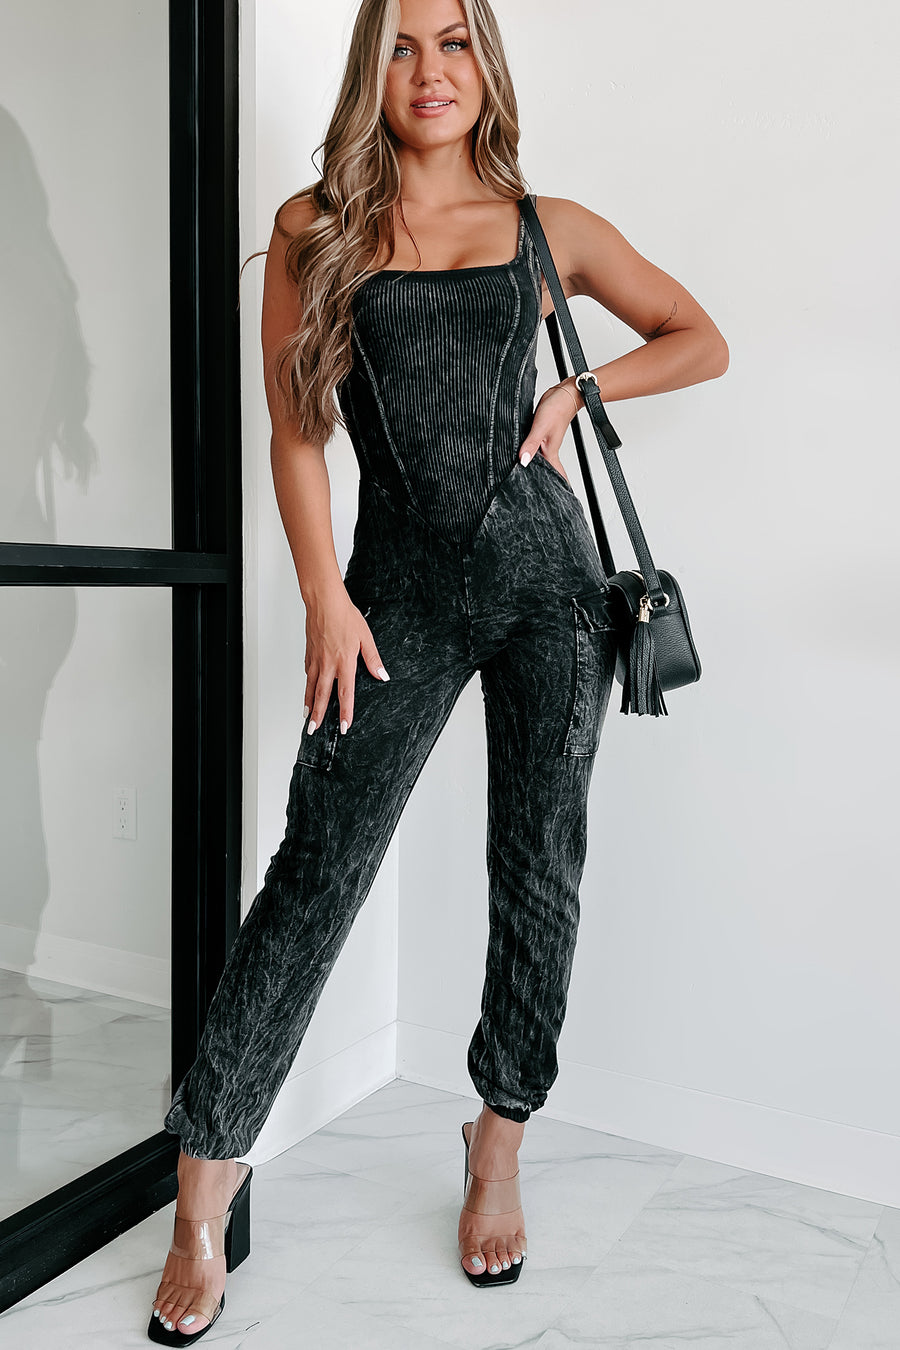 No Issues Here Mineral Wash Cargo Jumpsuit (Black) - NanaMacs